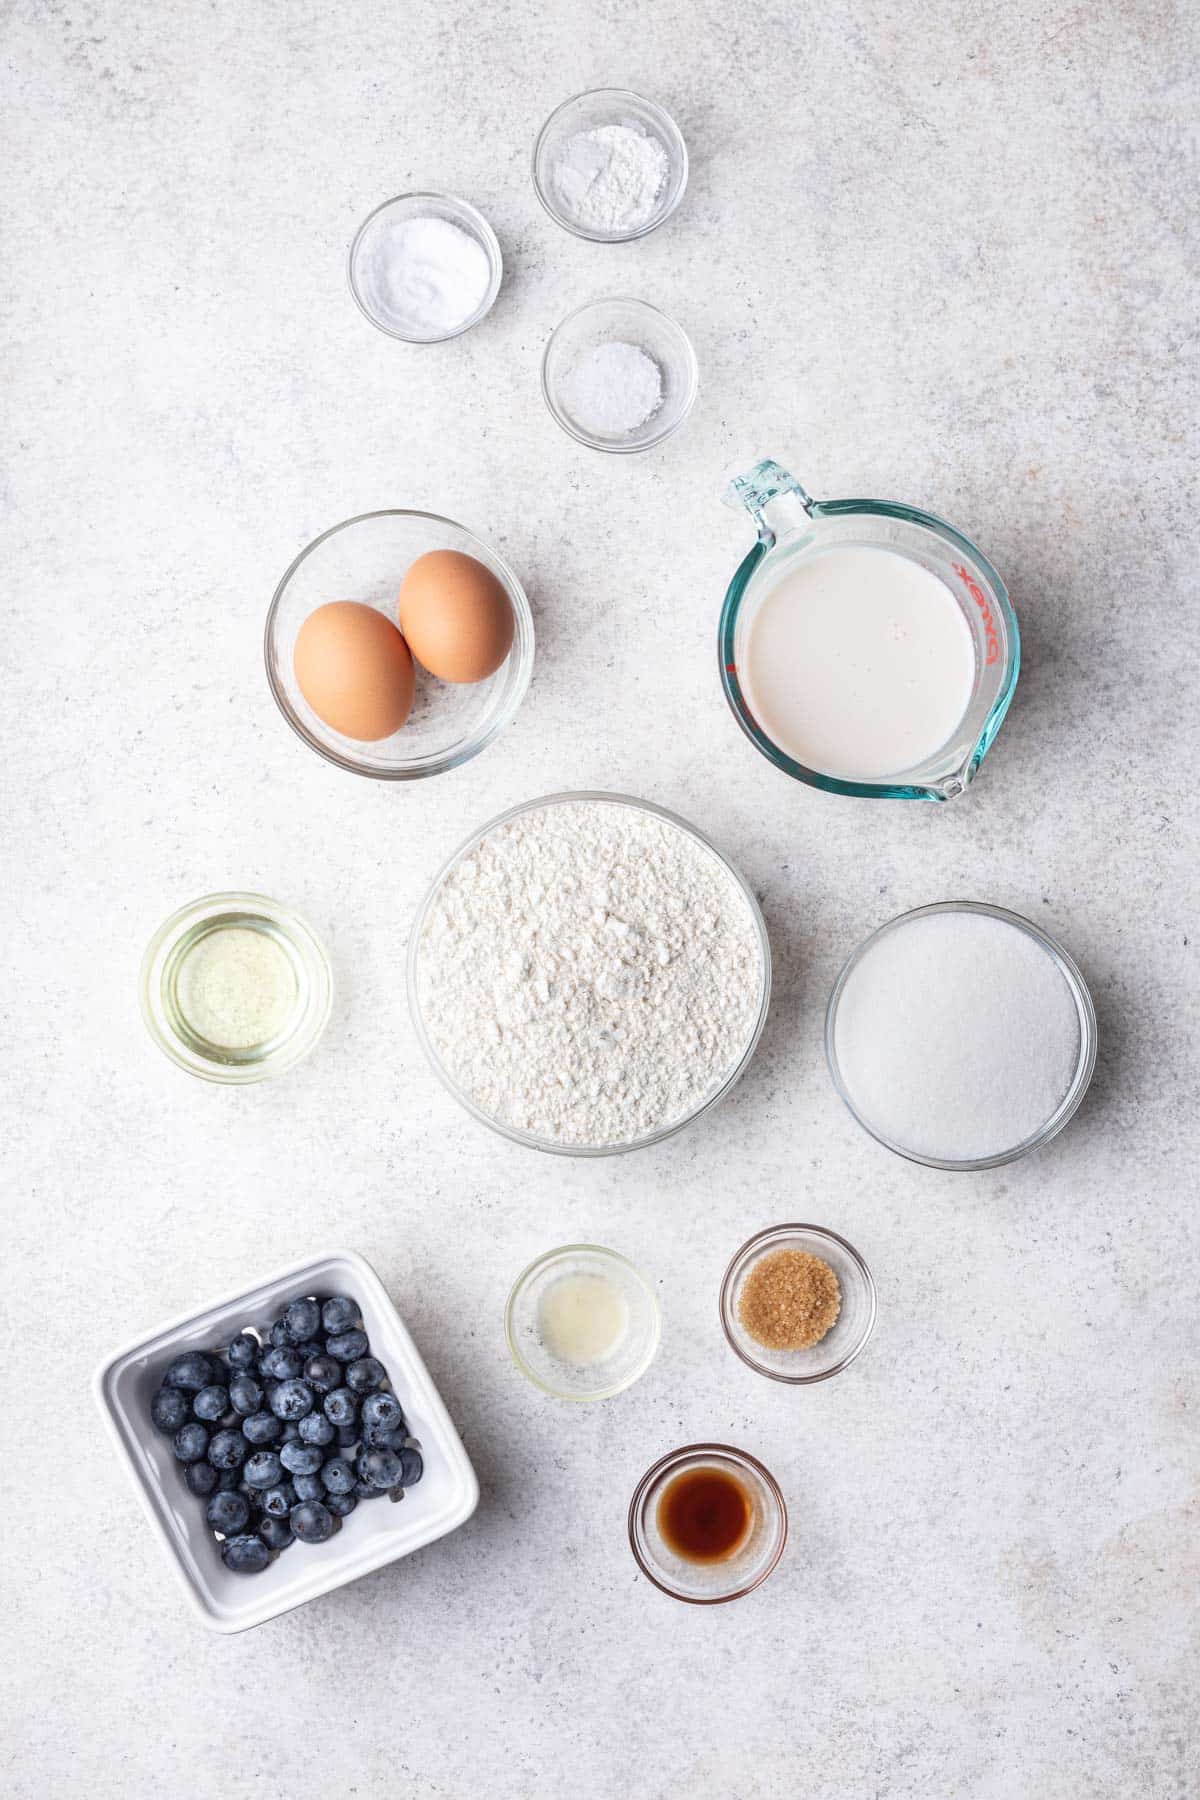 Ingredients for mini blueberry muffins in dishes.